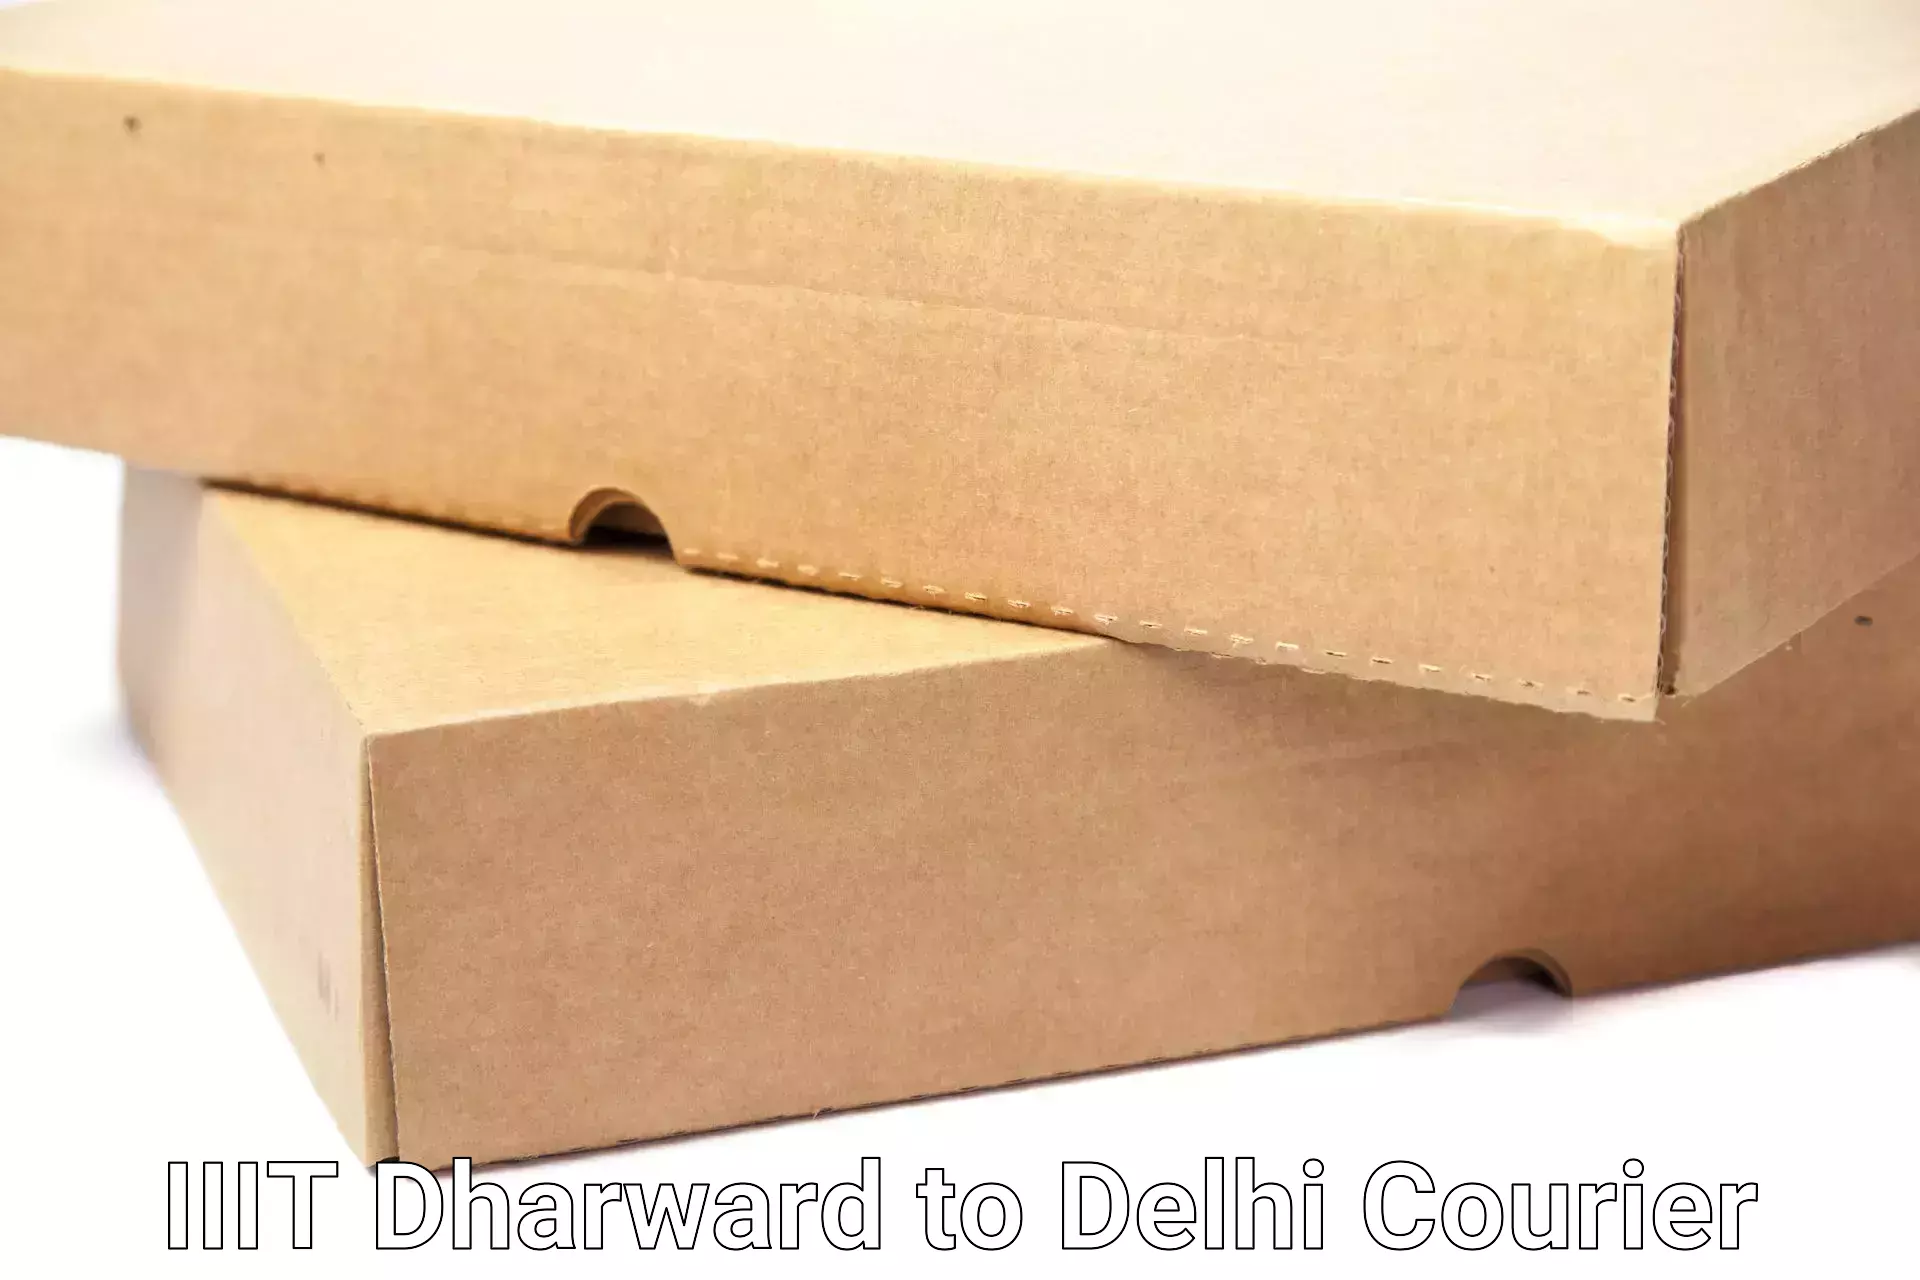 Personalized relocation plans IIIT Dharward to Lodhi Road